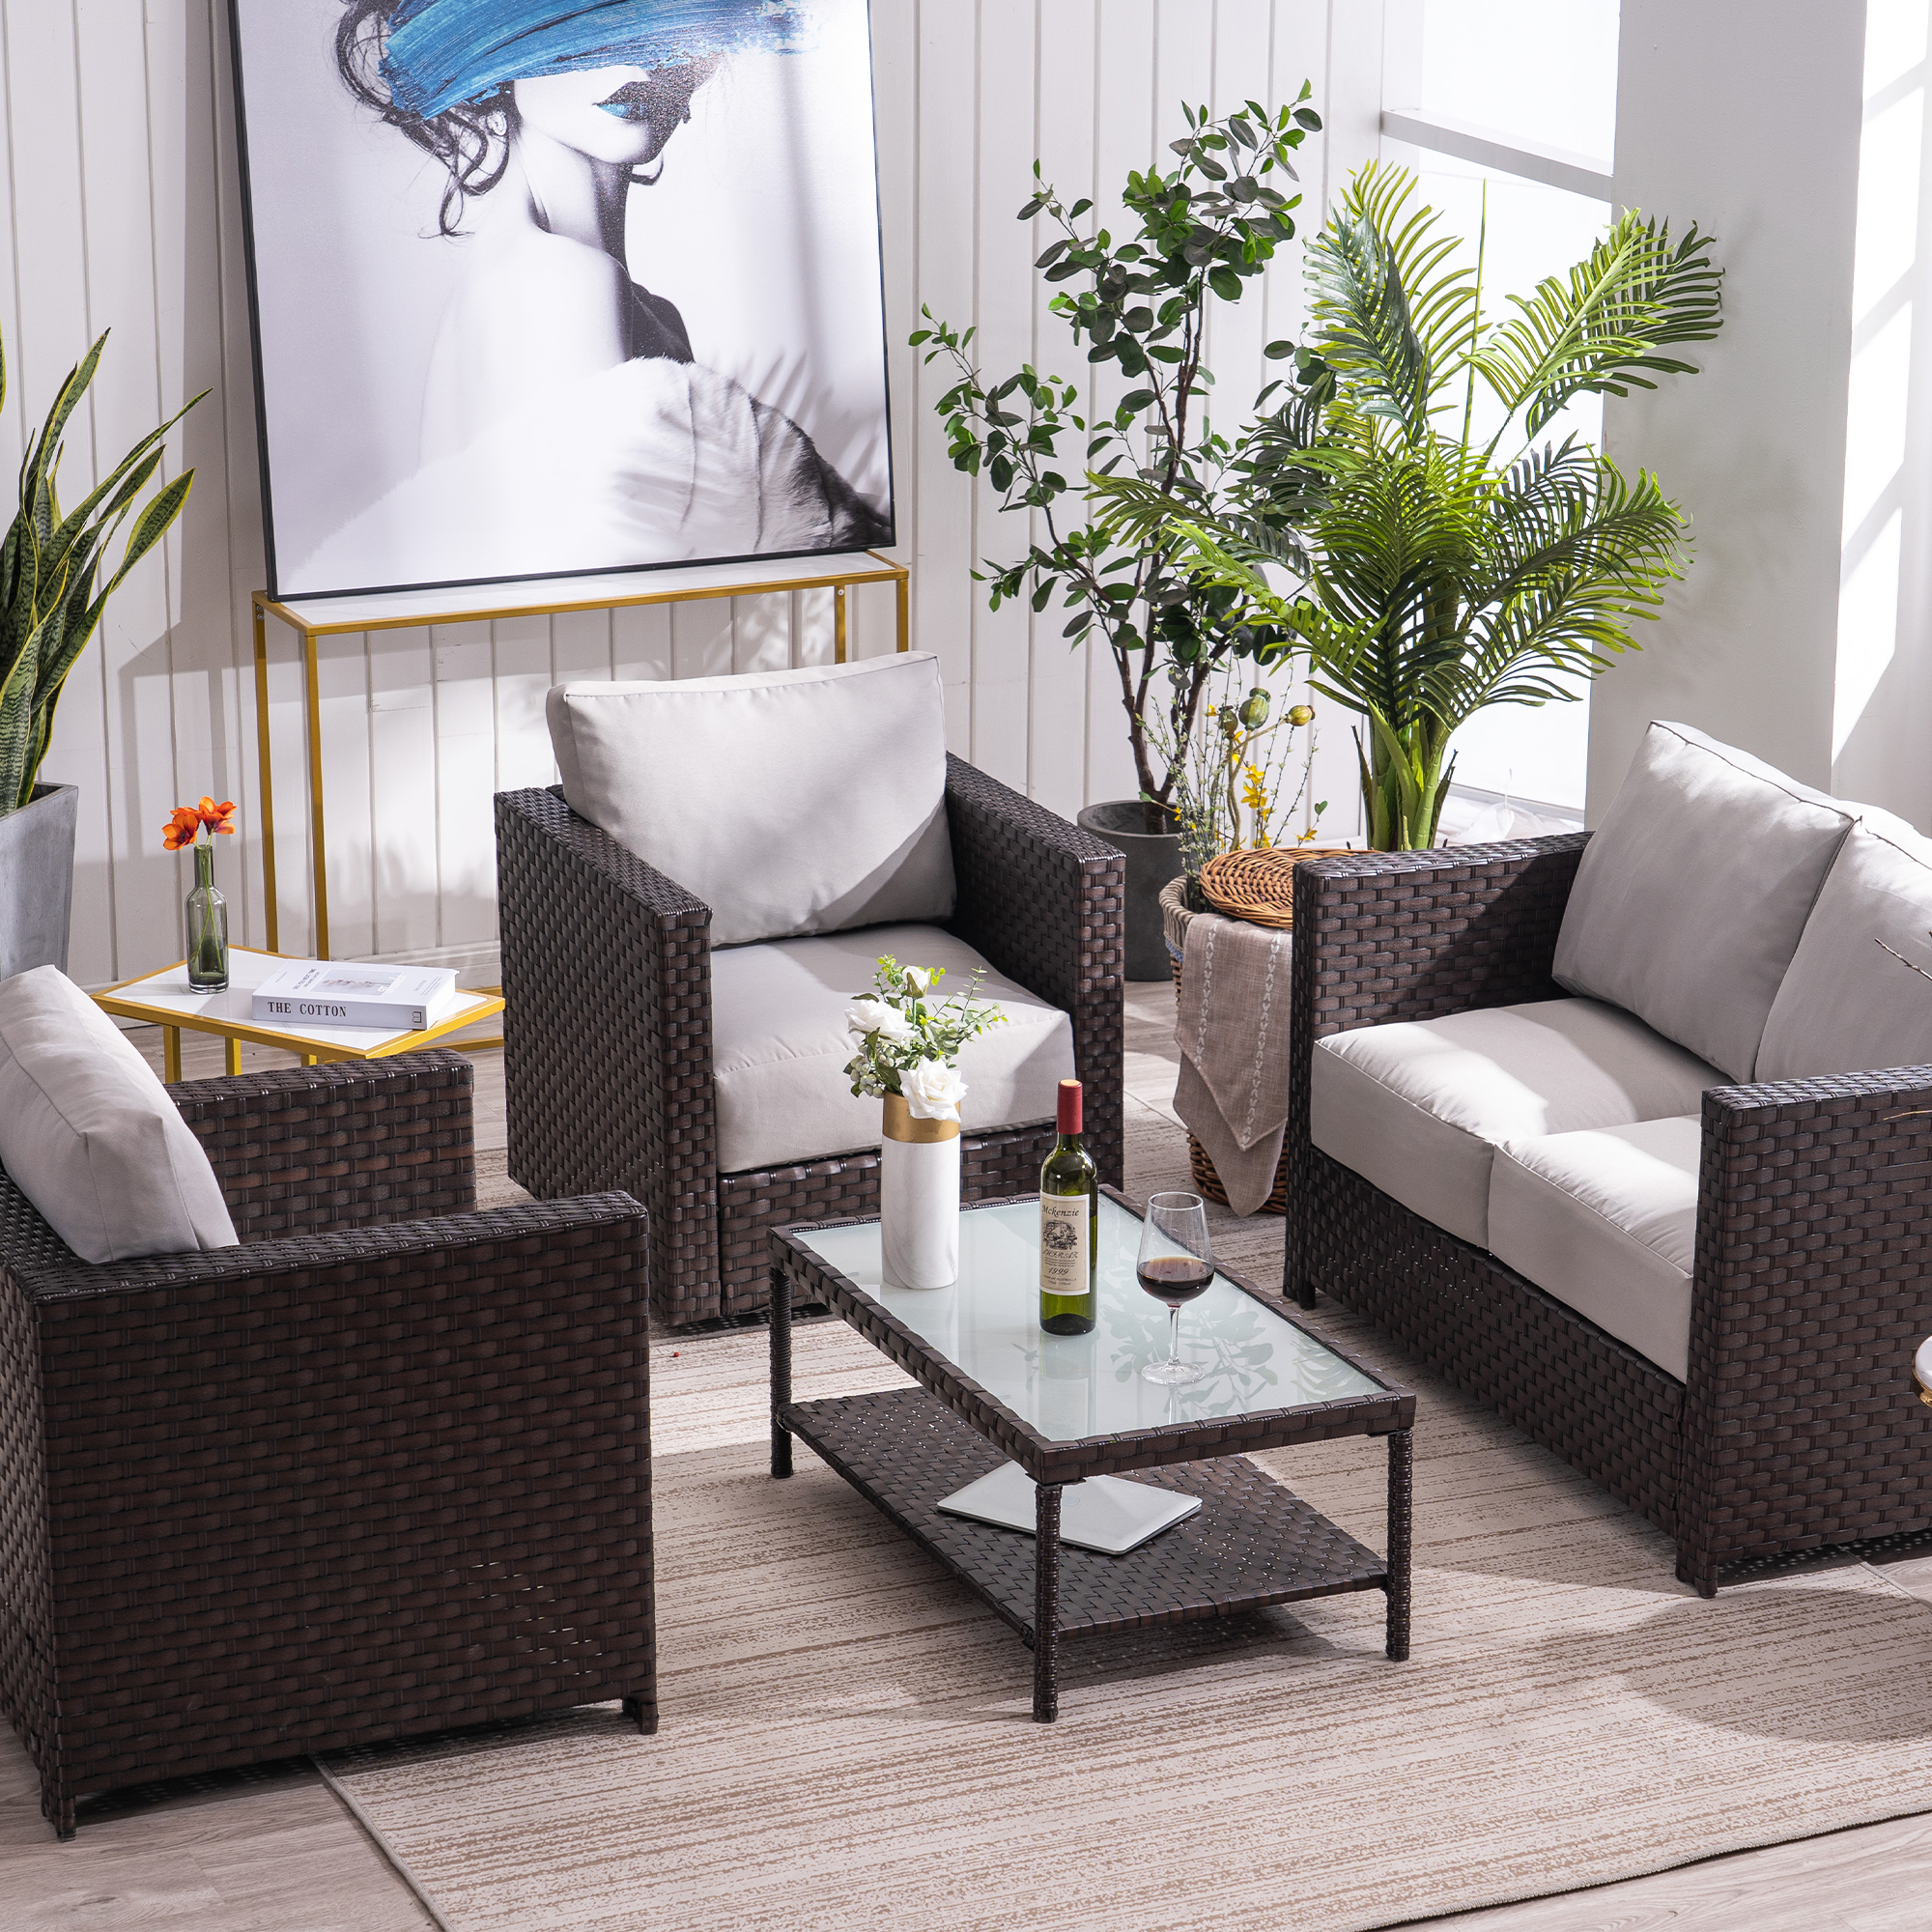 Mcombo Wicker Patio Sofa Furniture with Swivel Lounge Chair and Cushion , Coffee Table with Tempered Frosted Glass,4 Pieces Wicker Conversation Set ,Outdoor Loveseat 6082-9575EY (Grey) - image 1 of 8